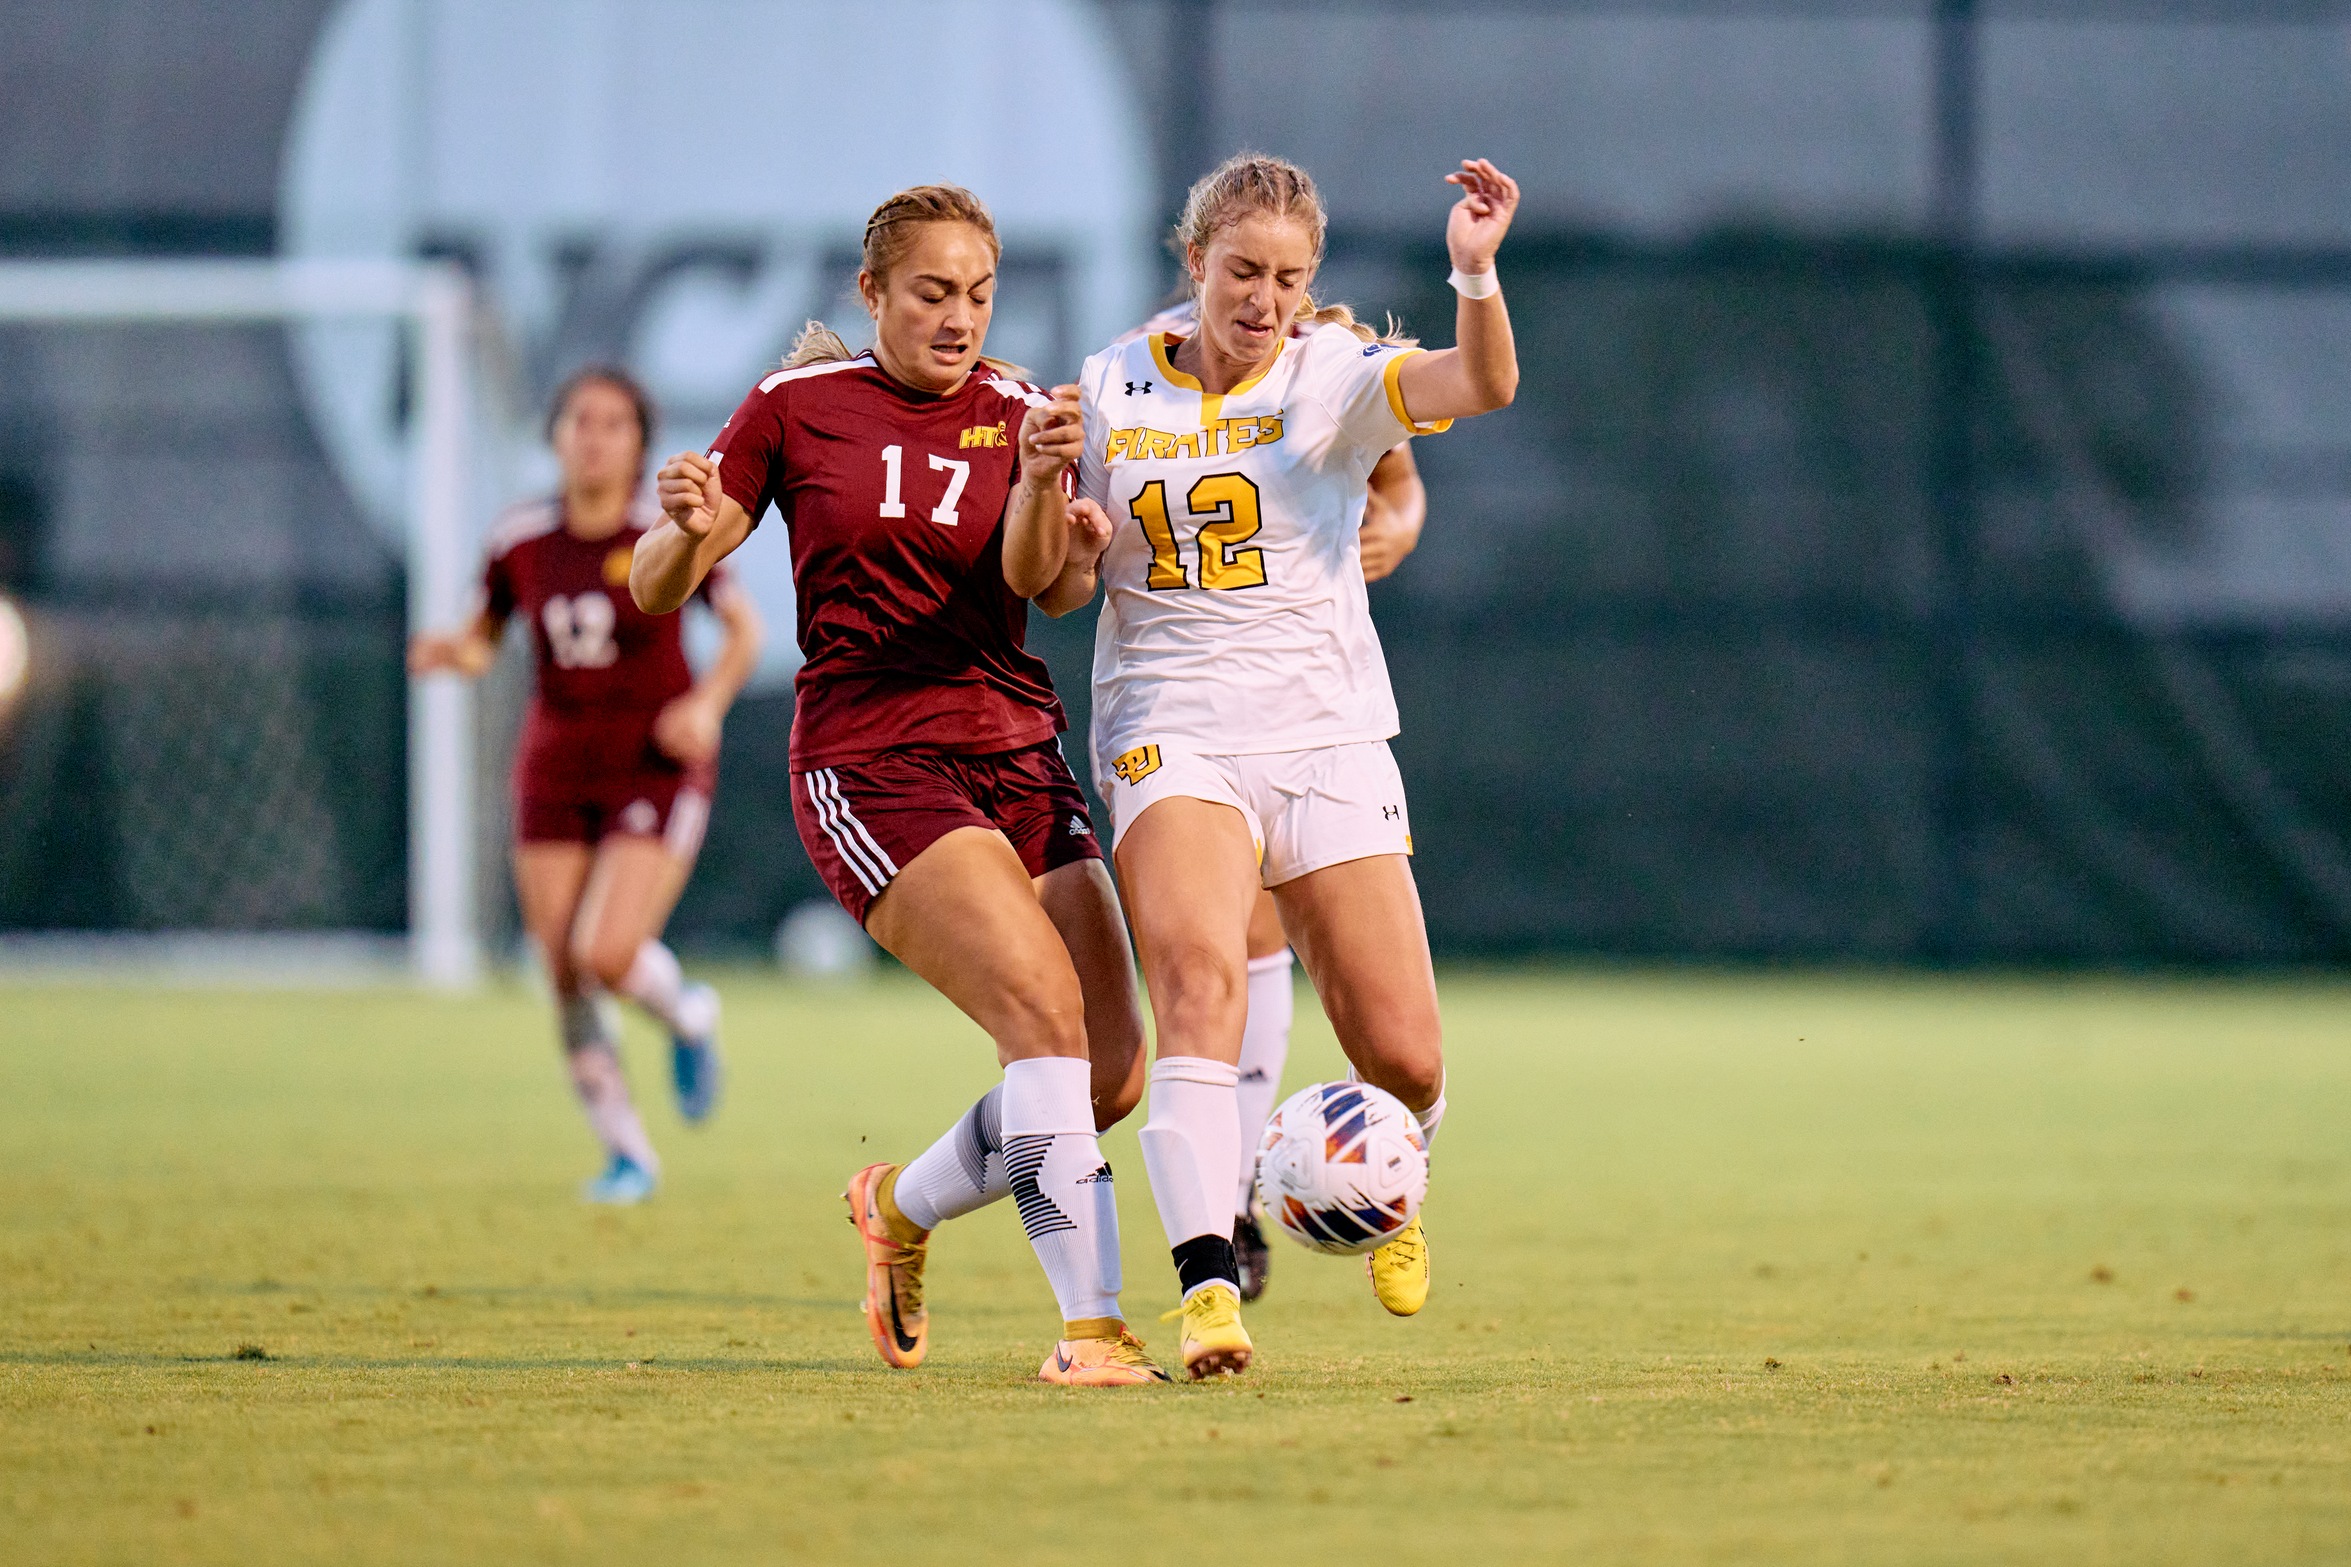 Samantha Hazen (12) battles for possession against a Huston-Tillotson defender earlier this season. Hazen tallied a goal and an assist against Schreiner on Sunday. (Photo courtesy of Carlos Barron)